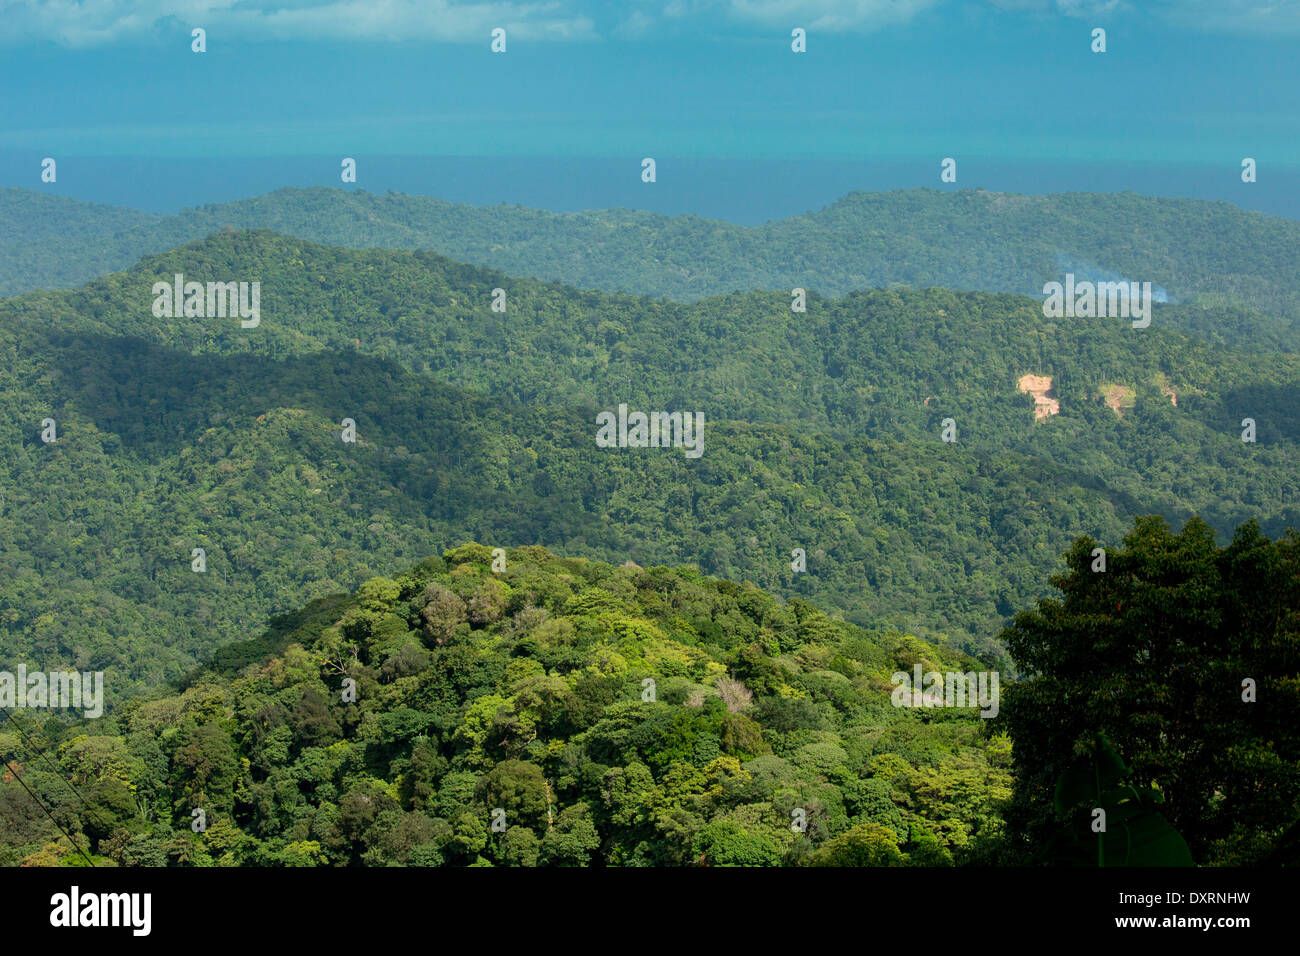 The forested protected Northern Range Mountains near Blanchisseuse, Trinidad. Stock Photo